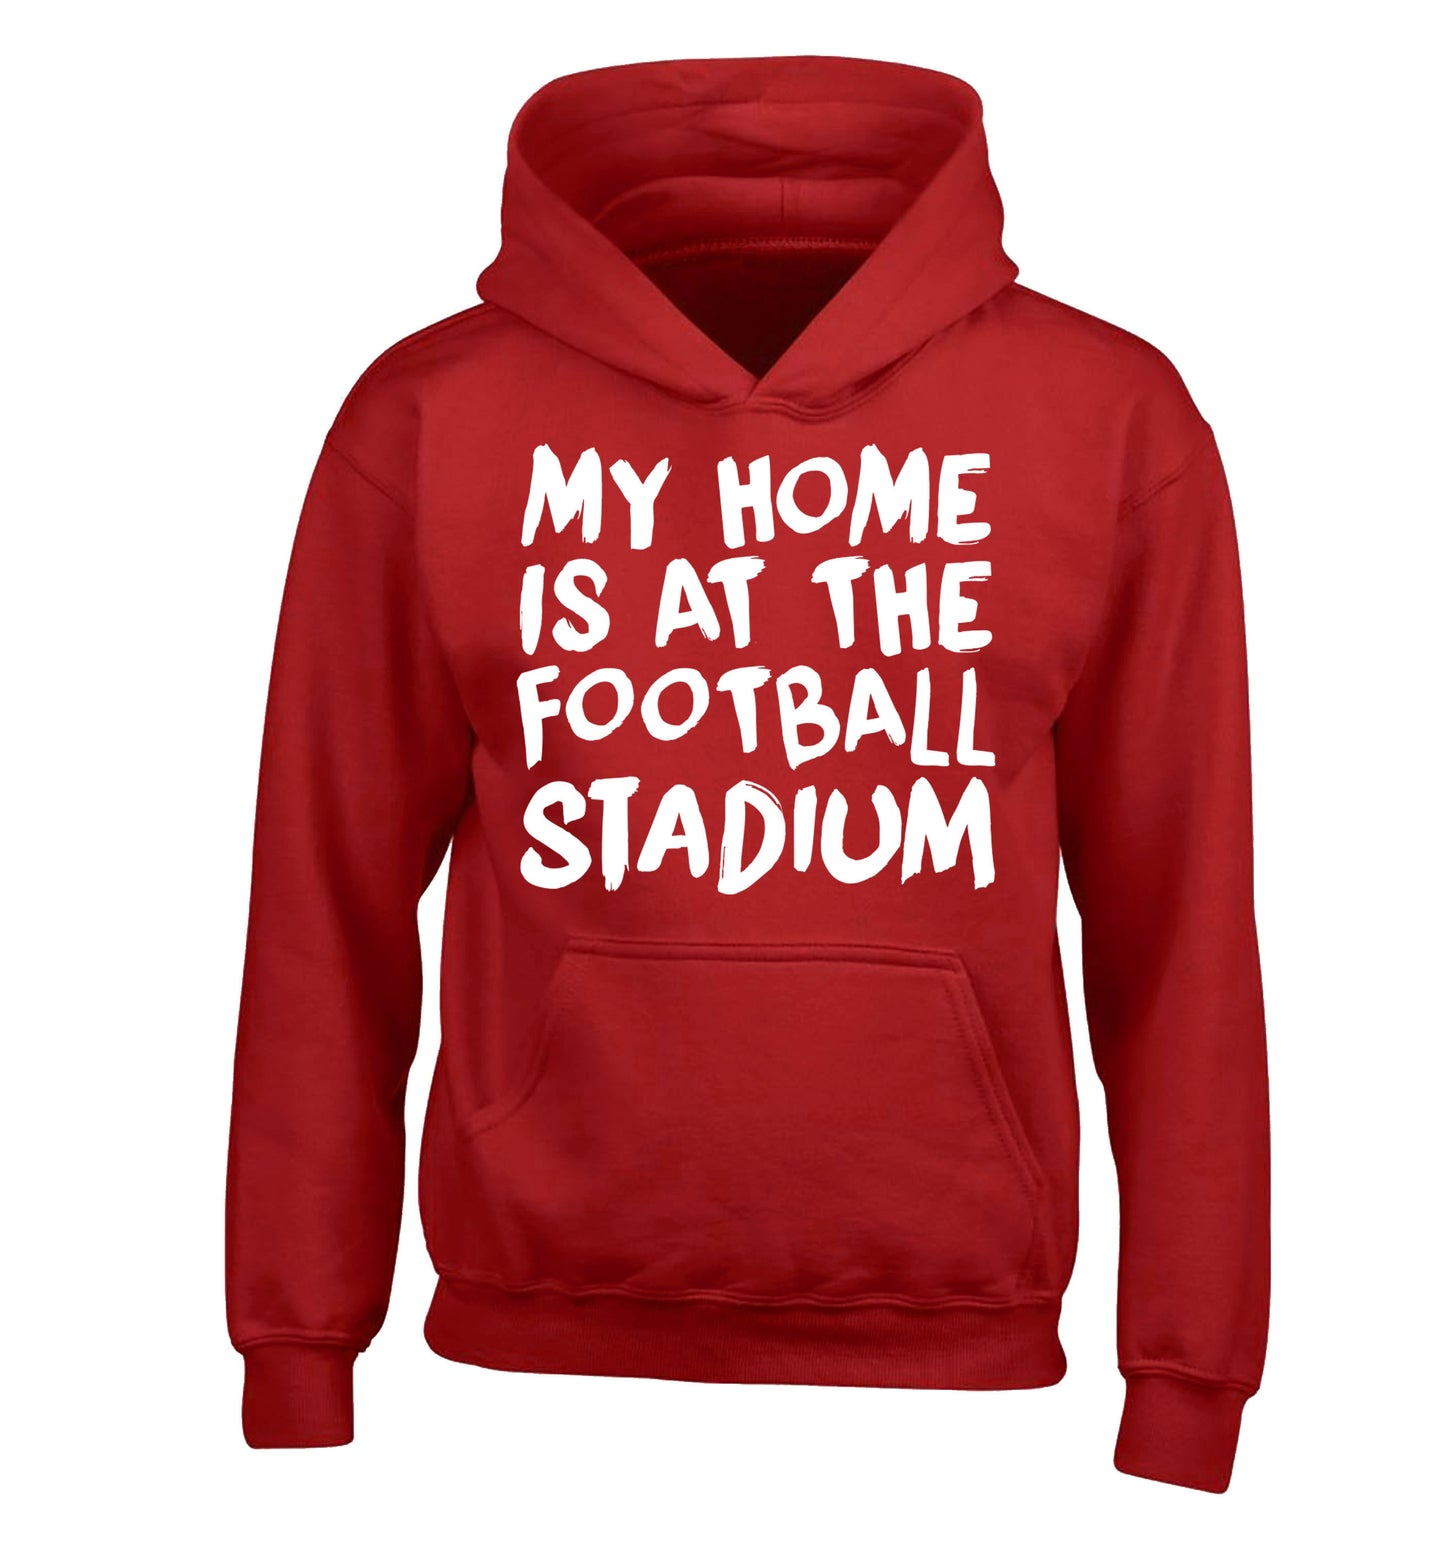 My home is at the football stadium children's red hoodie 12-14 Years